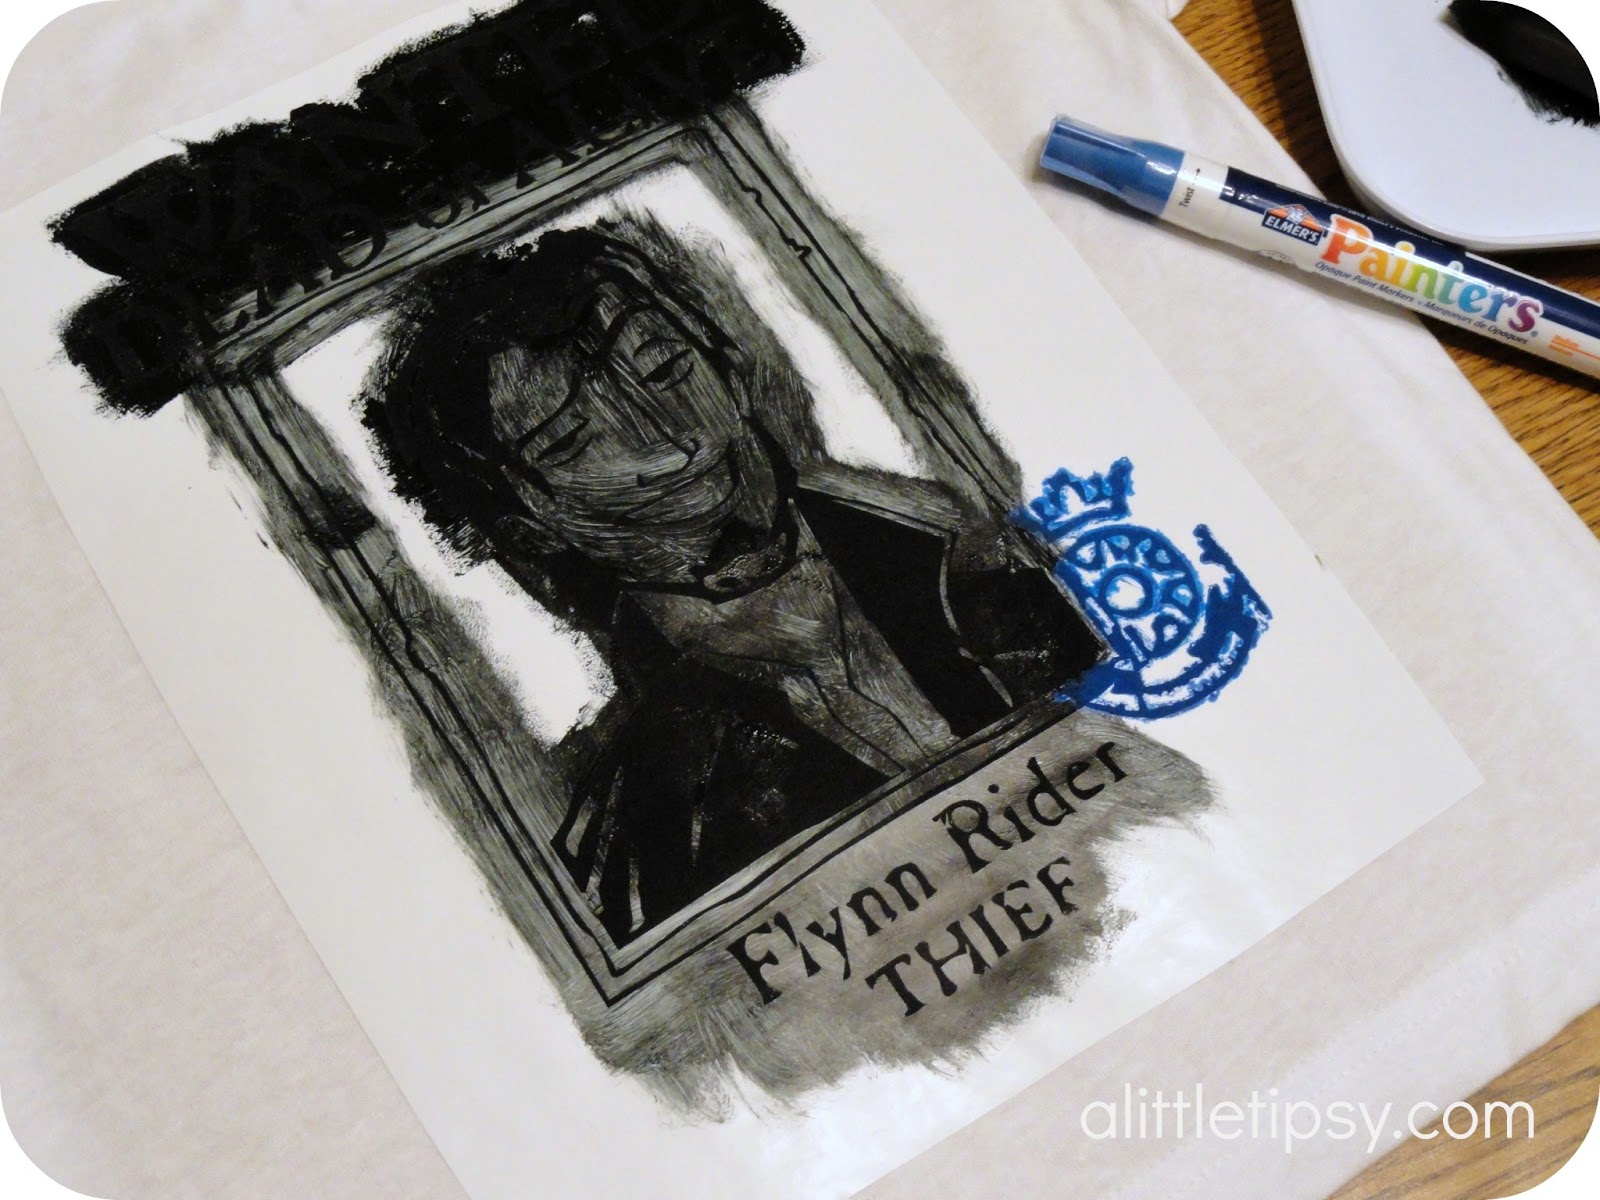 flynn-rider-wanted-poster-shirt-a-little-tipsy